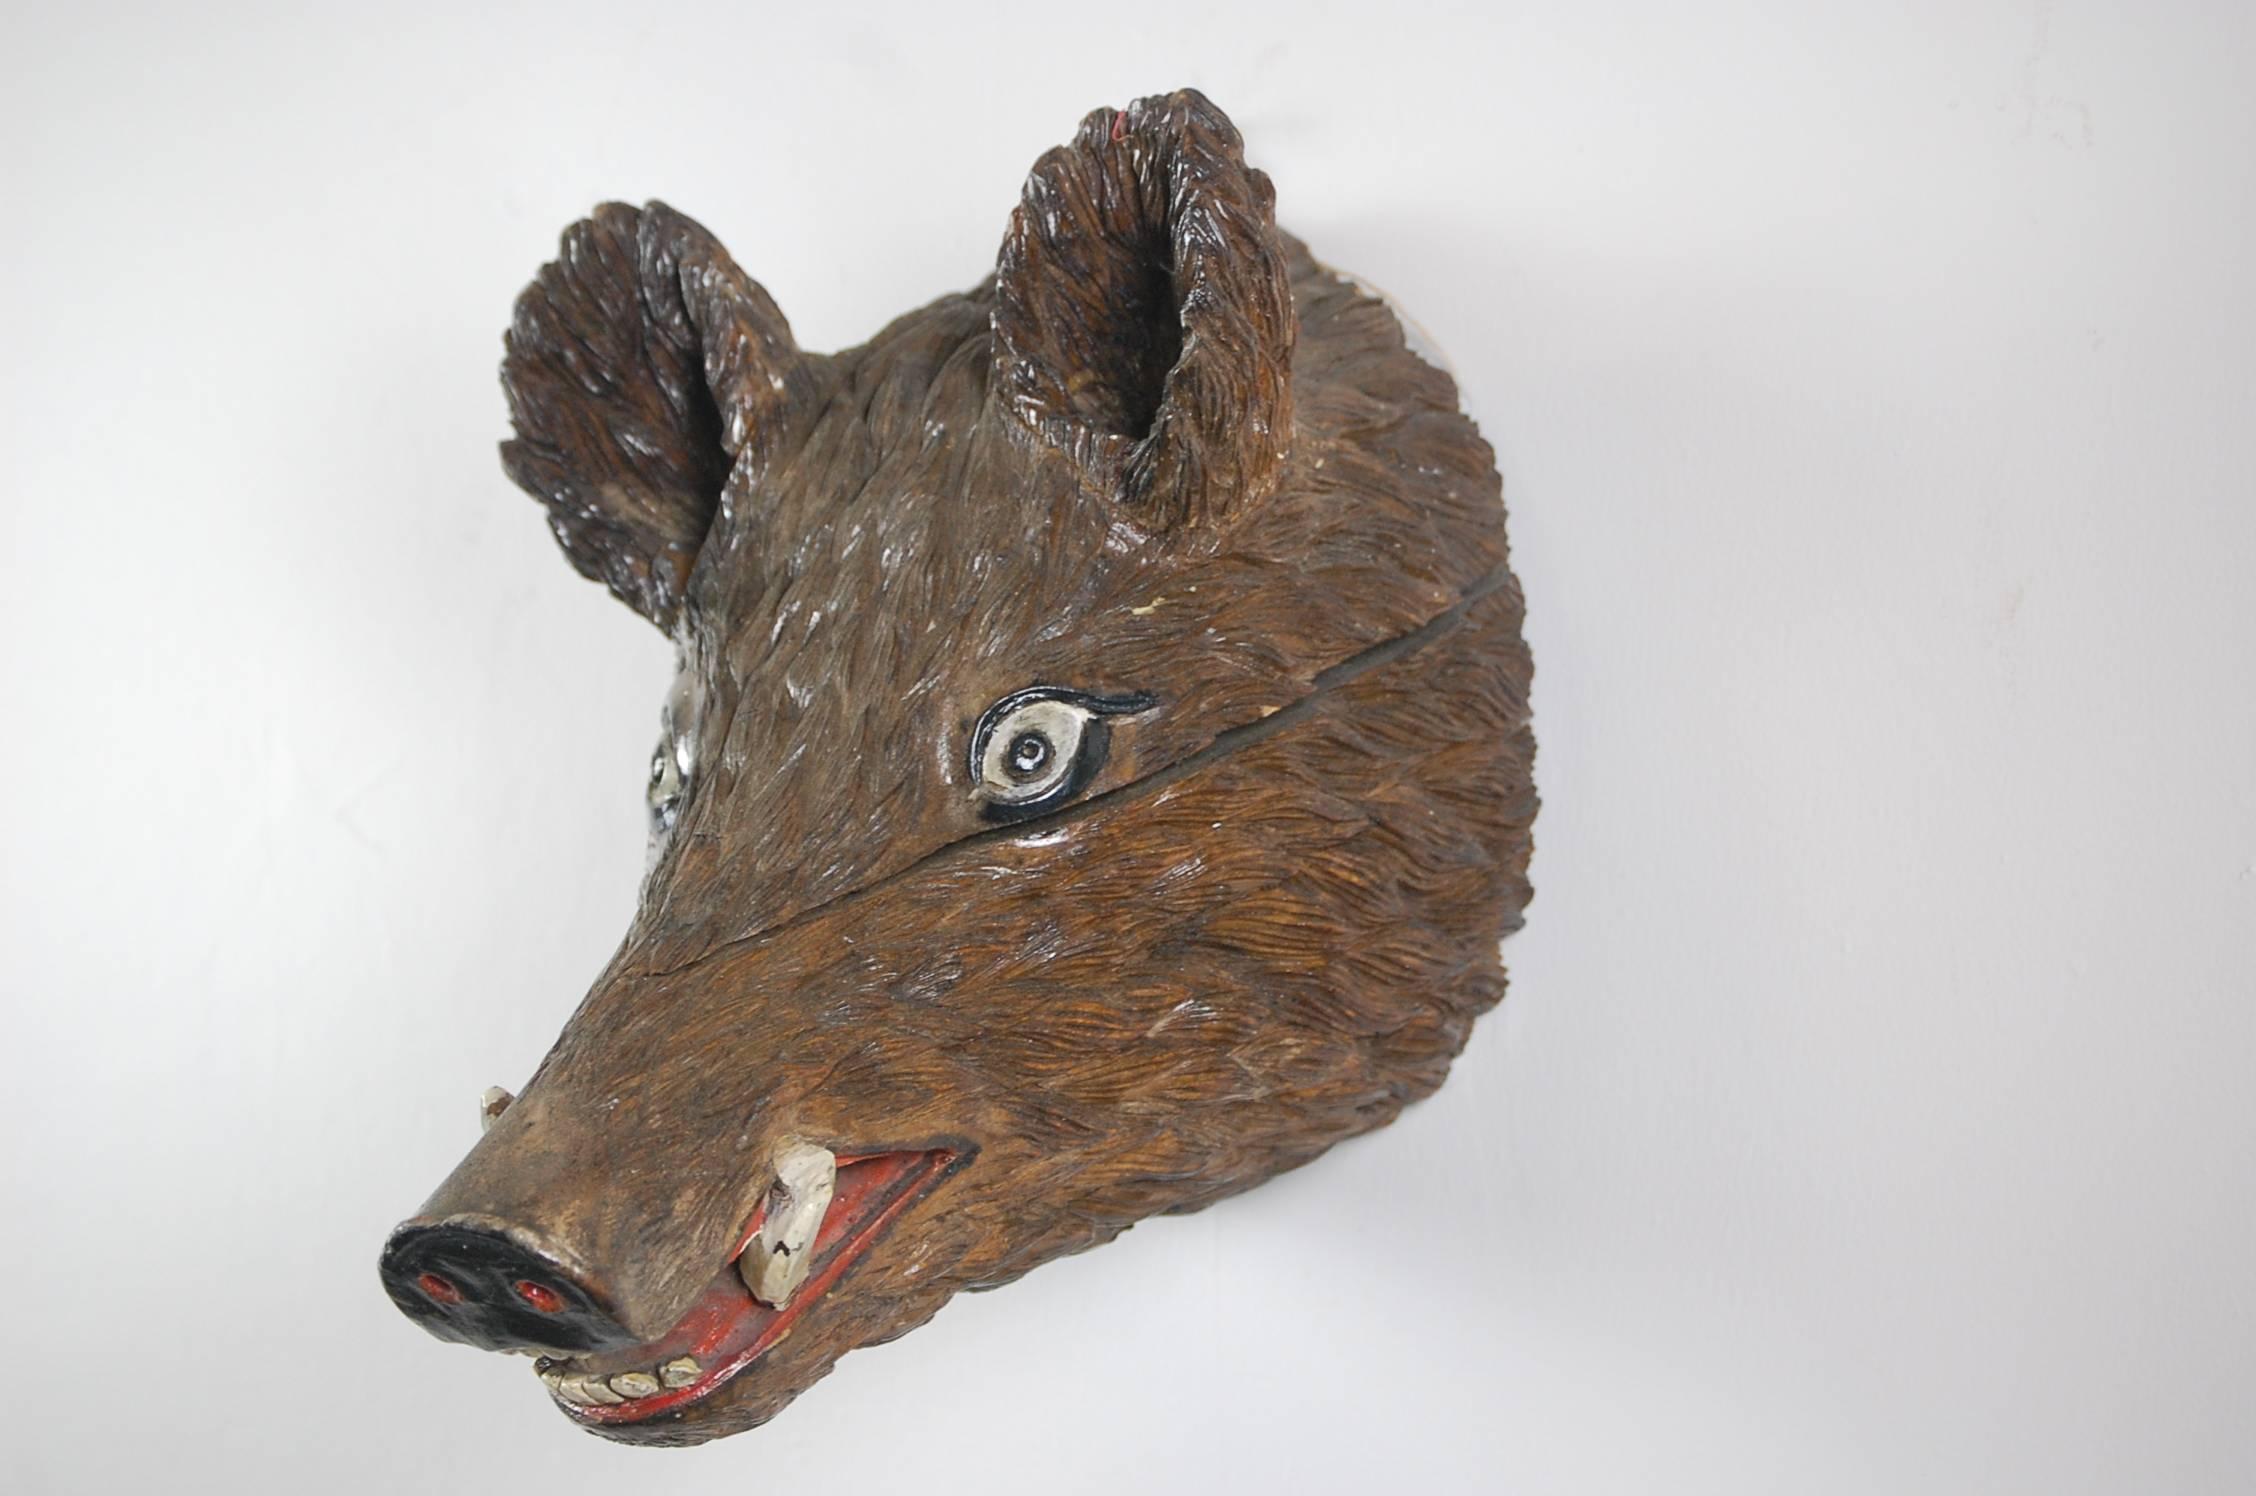 Early 20th century Black Forest carved wood trophy boar head, wonderful intricate detailed carving, original polychrome painted finish. Minor losses and drying splits.